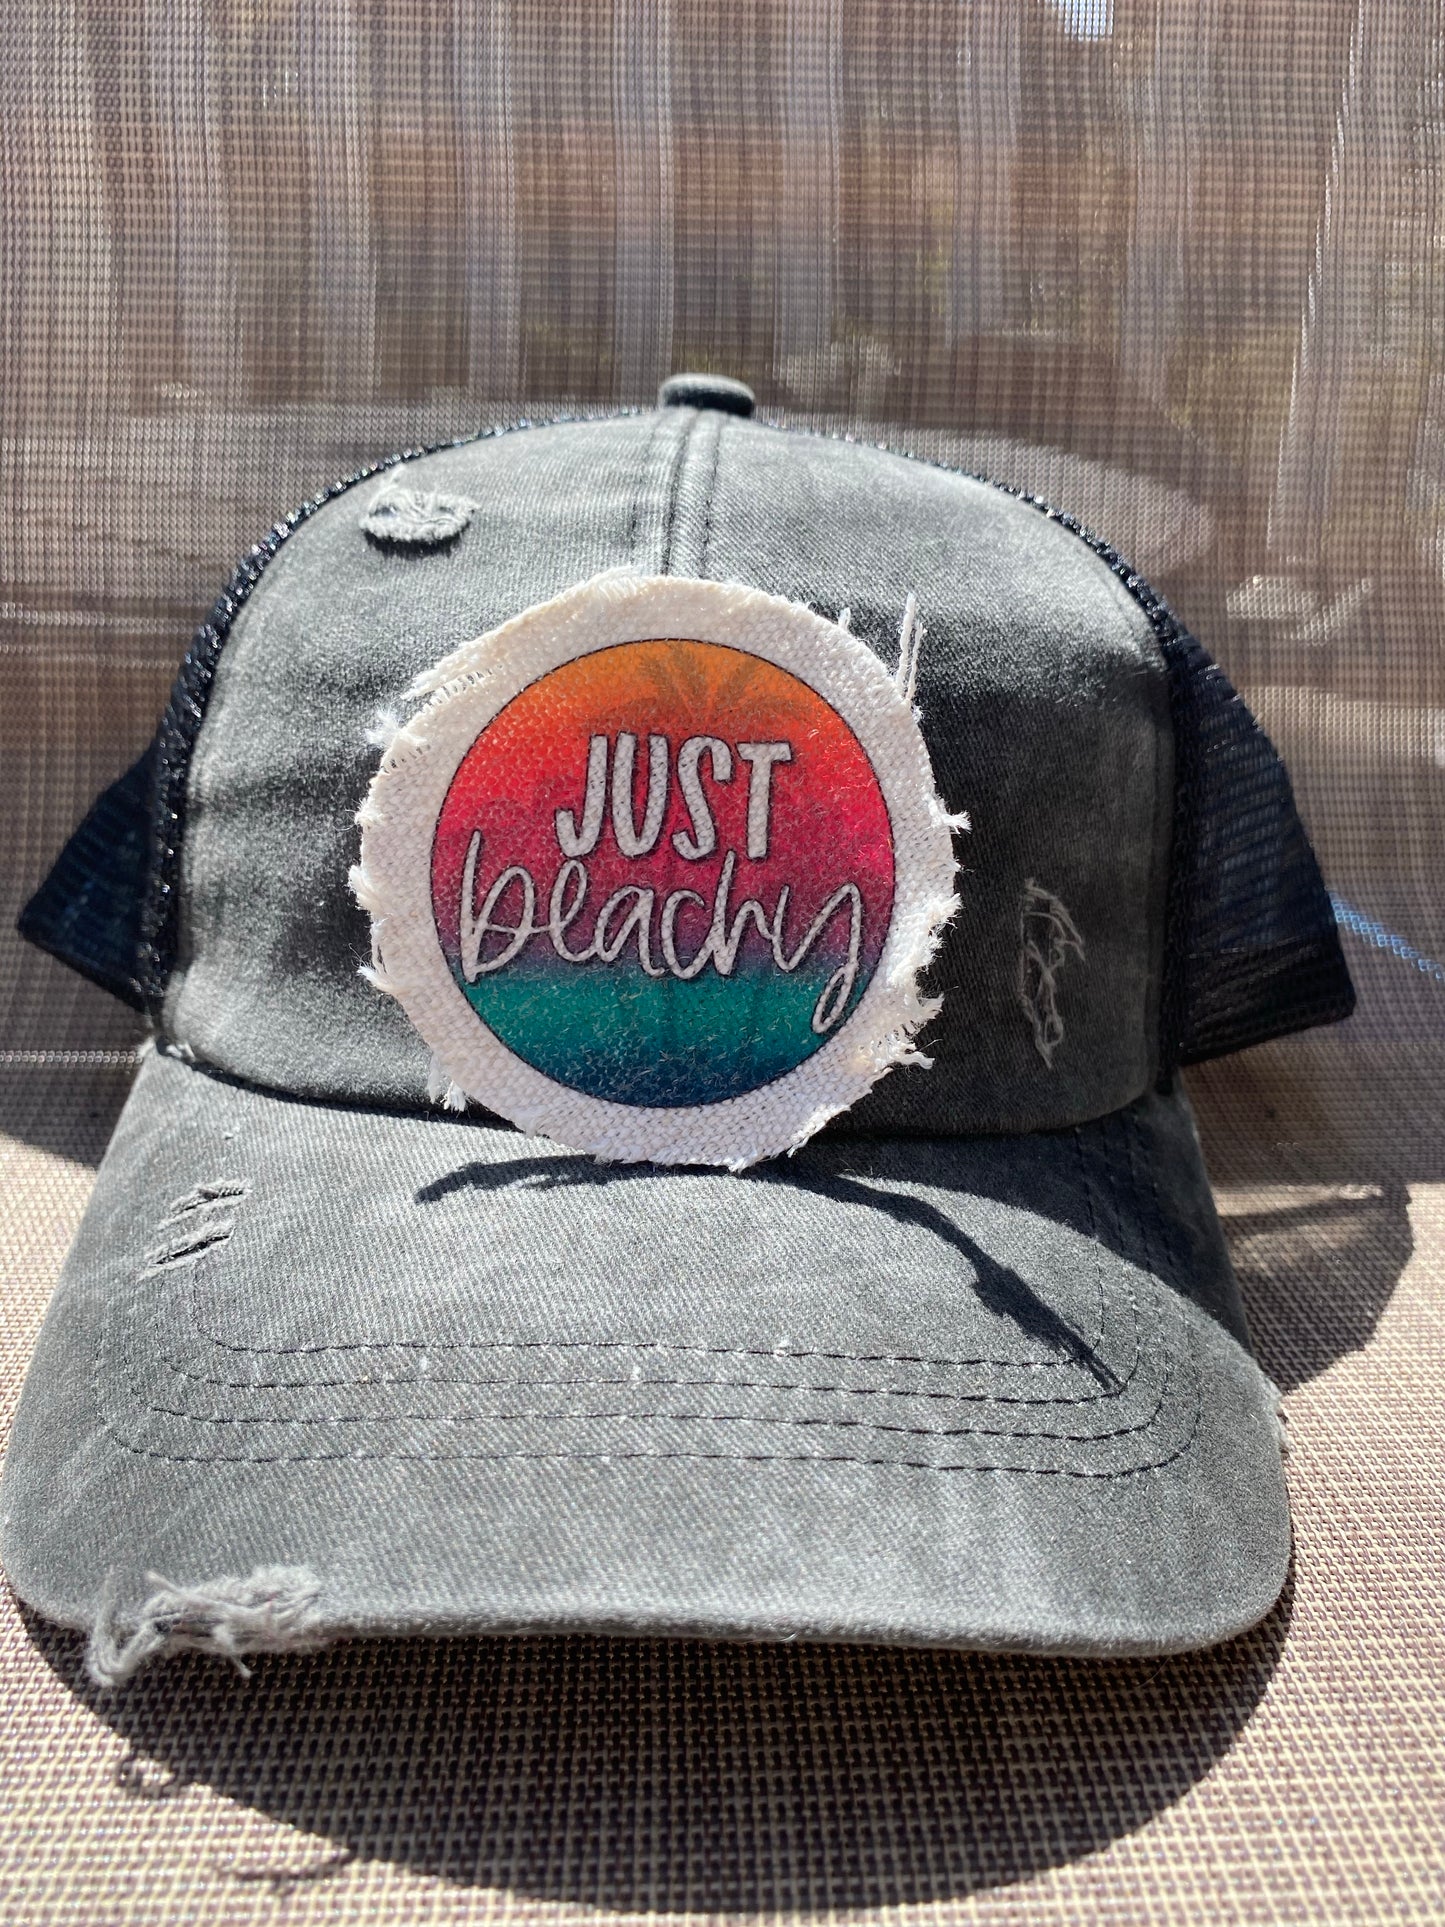 Just Beachy Hat Patch